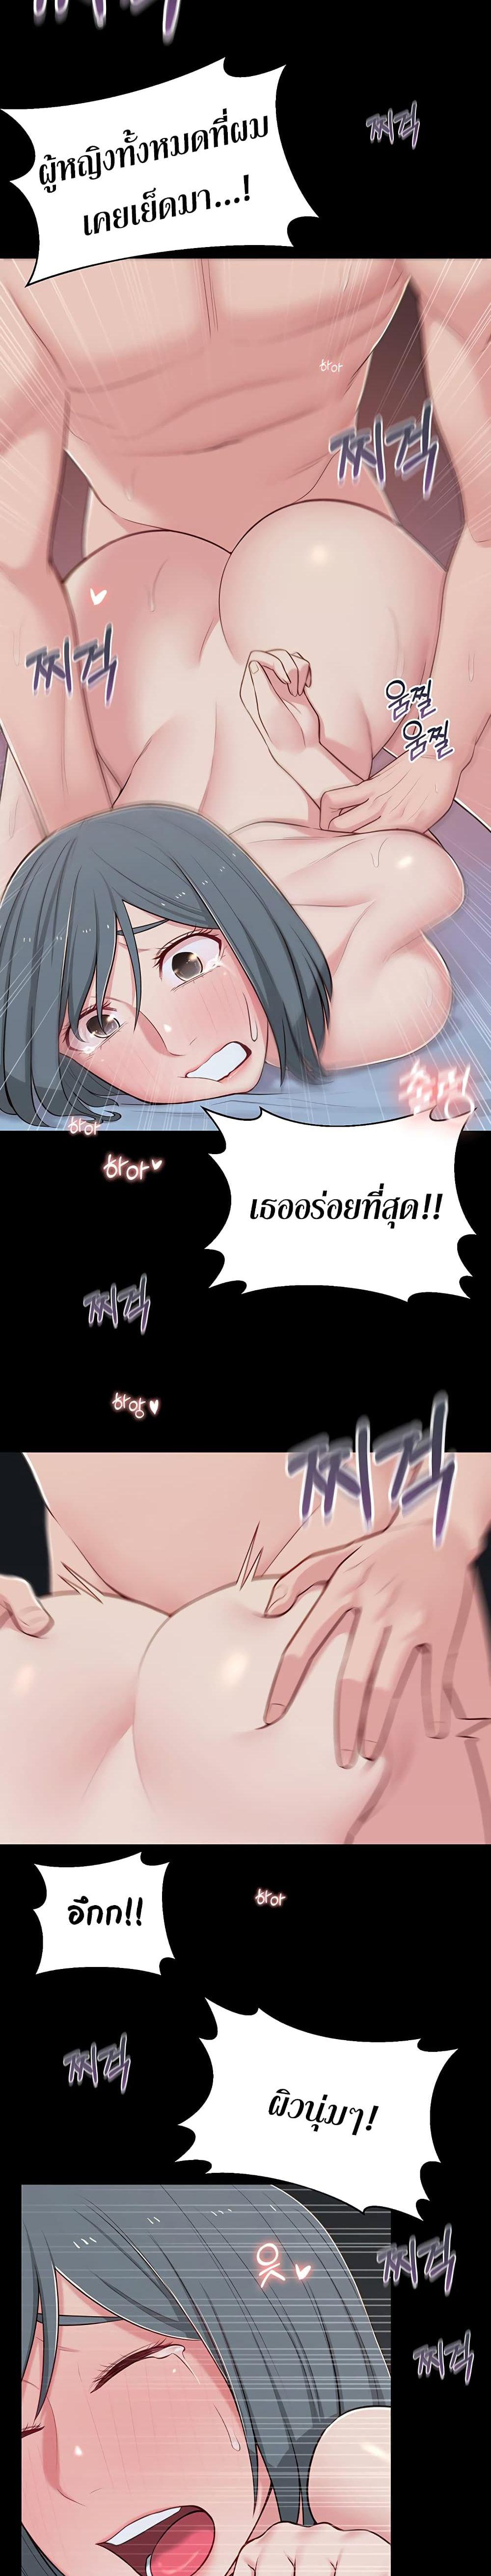 A Knowing Sister 12 ภาพ 7